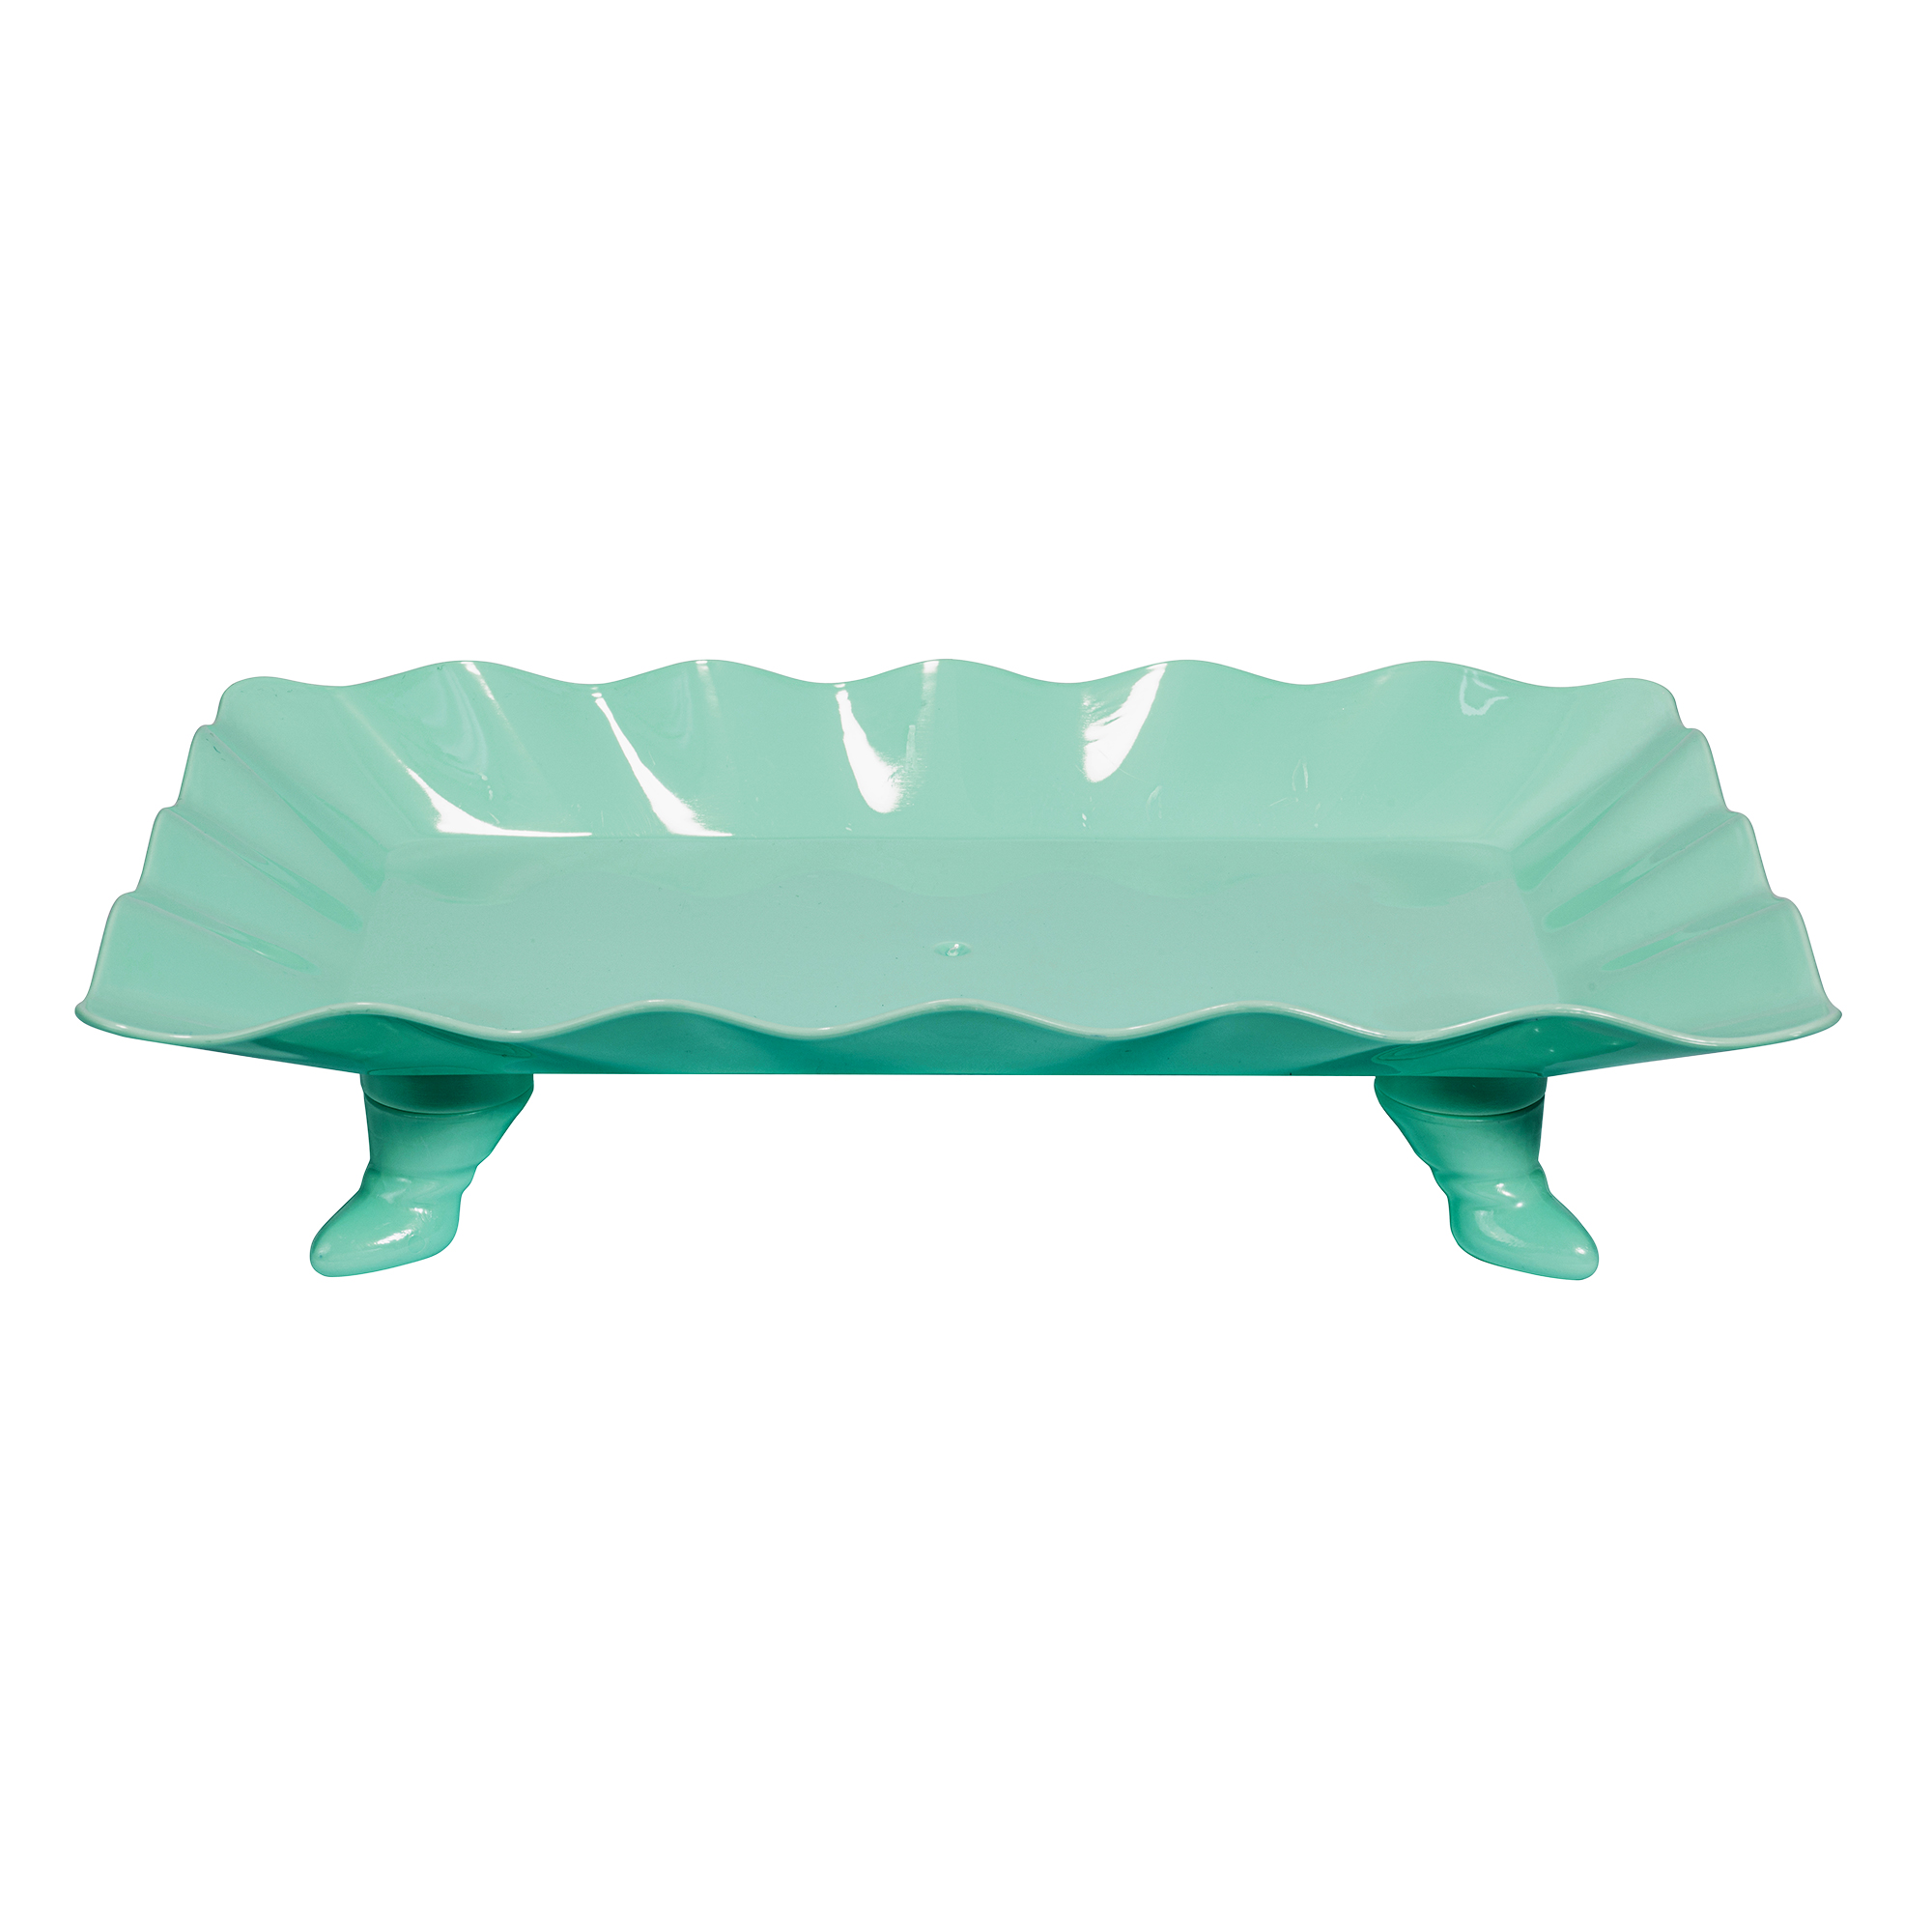 Plastic Scalloped Treat Stand - Turquoise